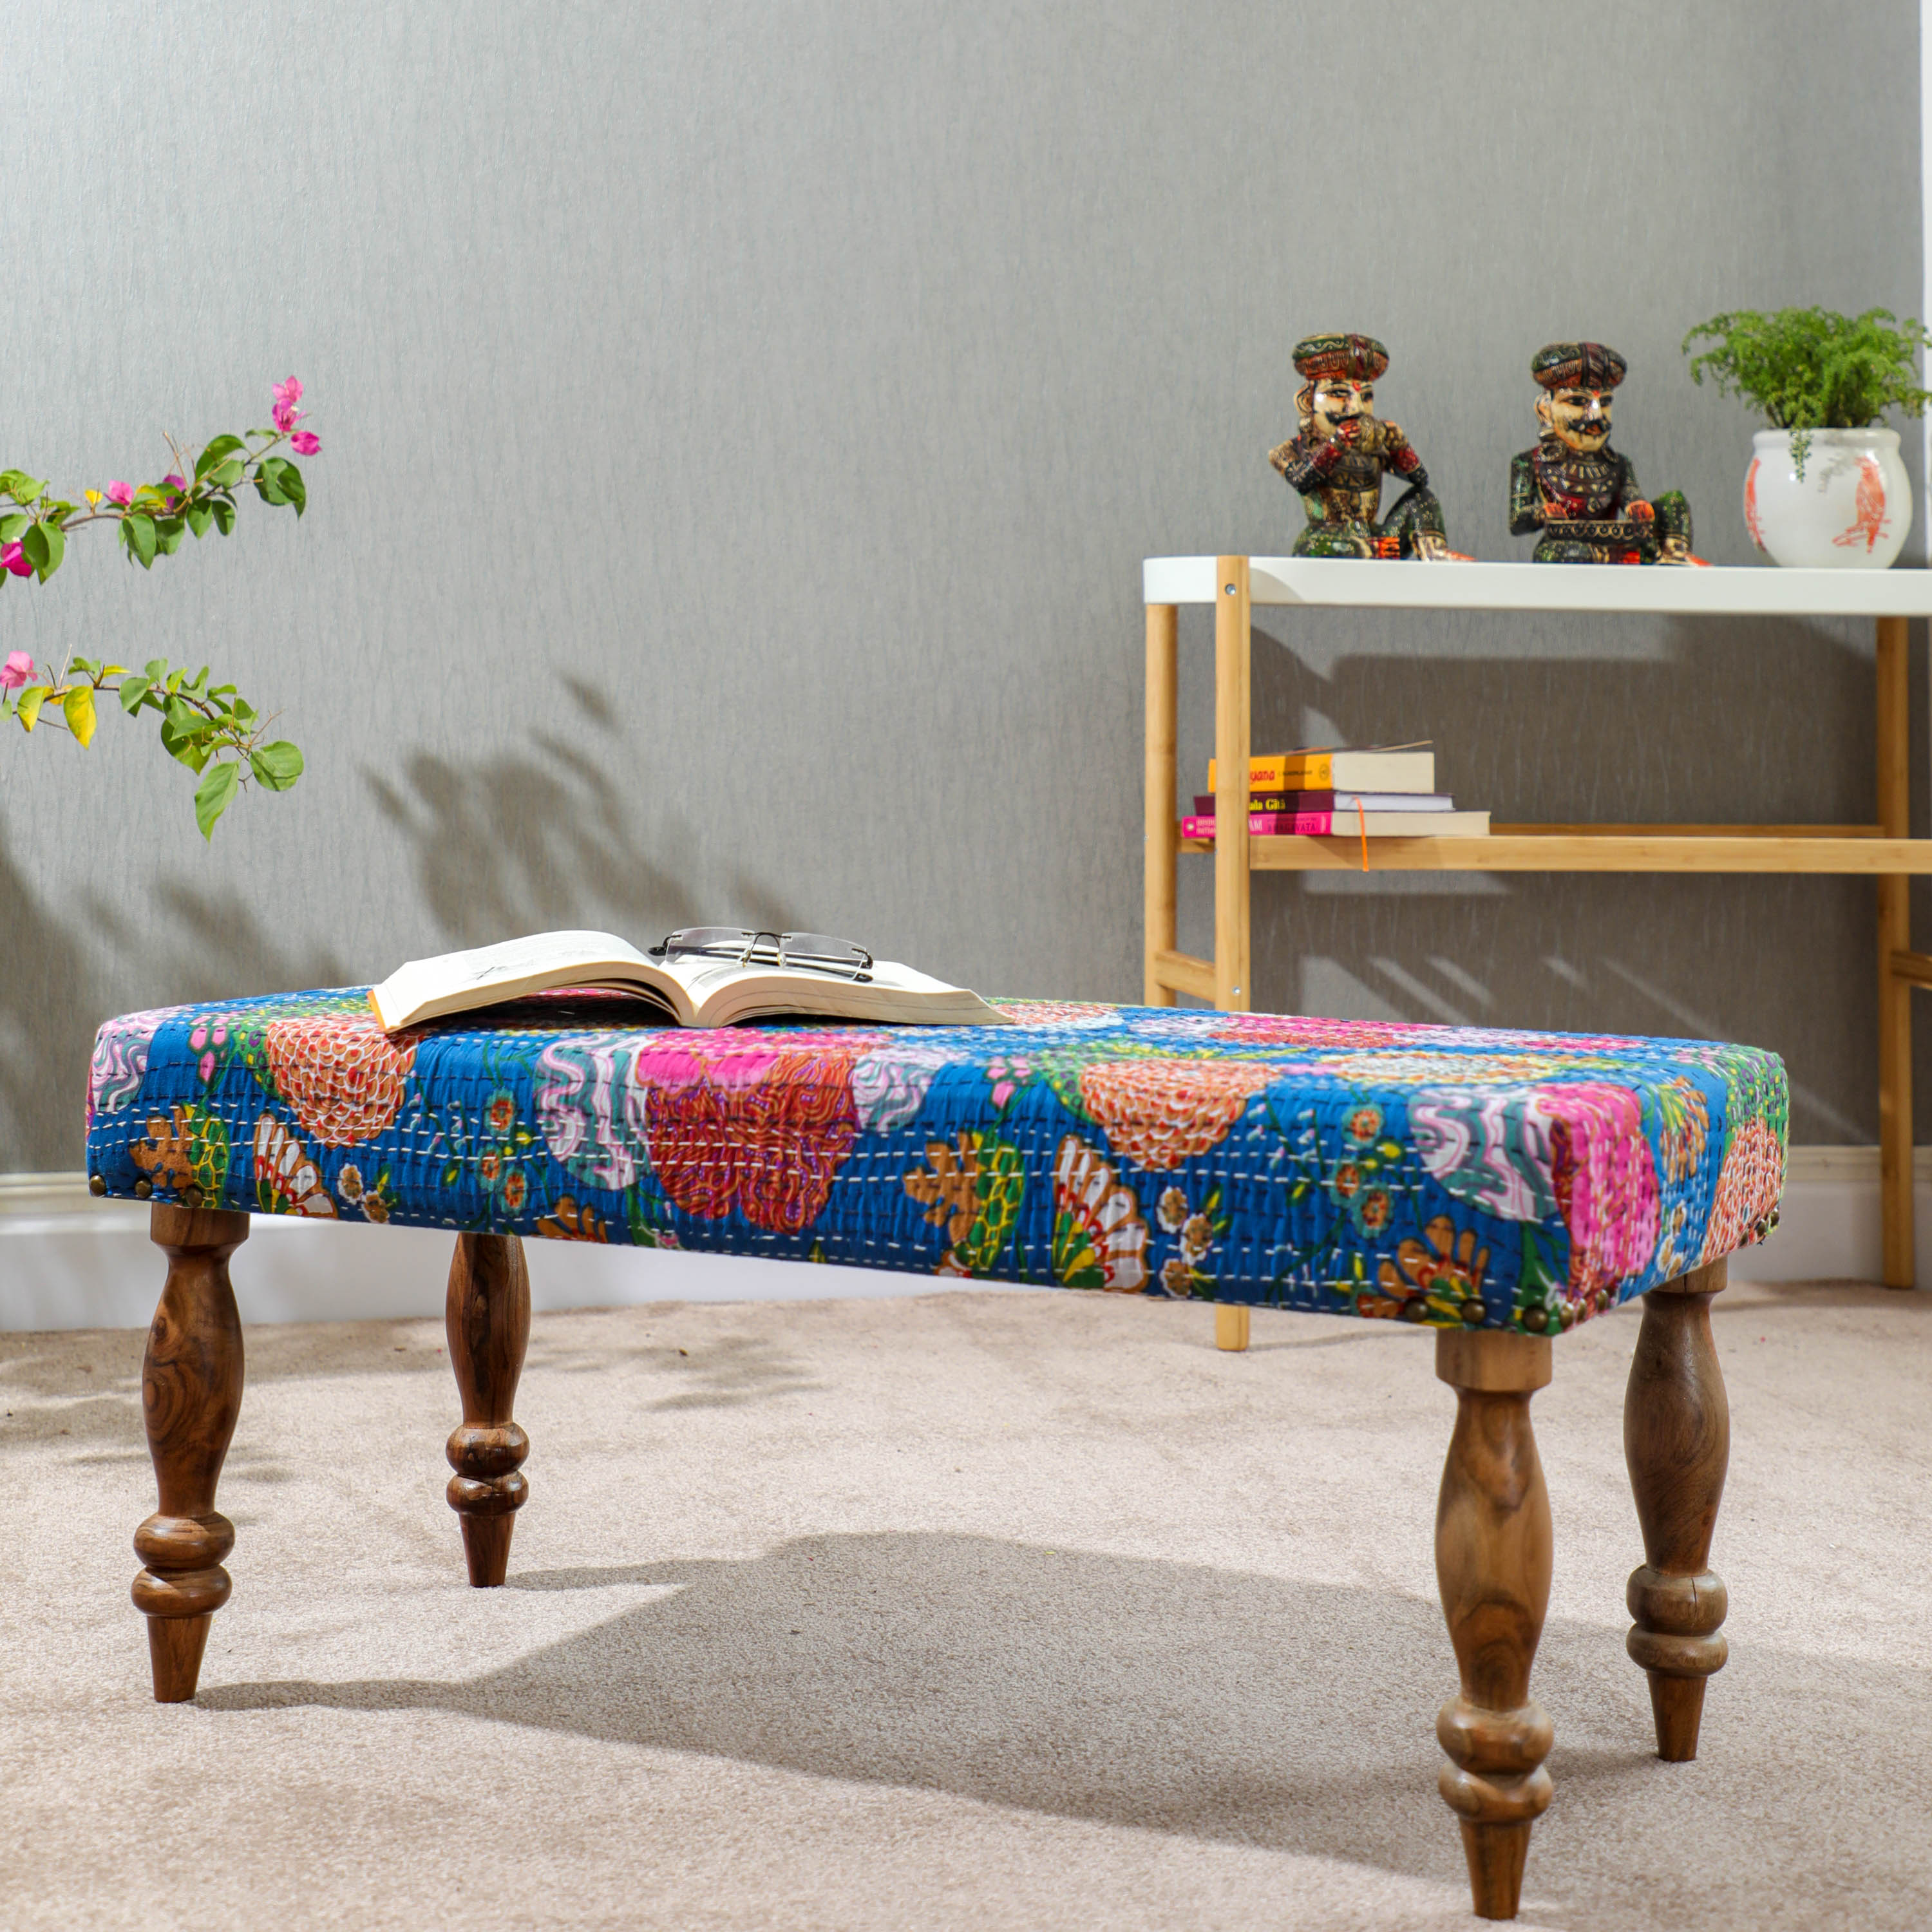 Detachable Wooden Bench for living room and guest room in the USA Desi style bench or stool in USA